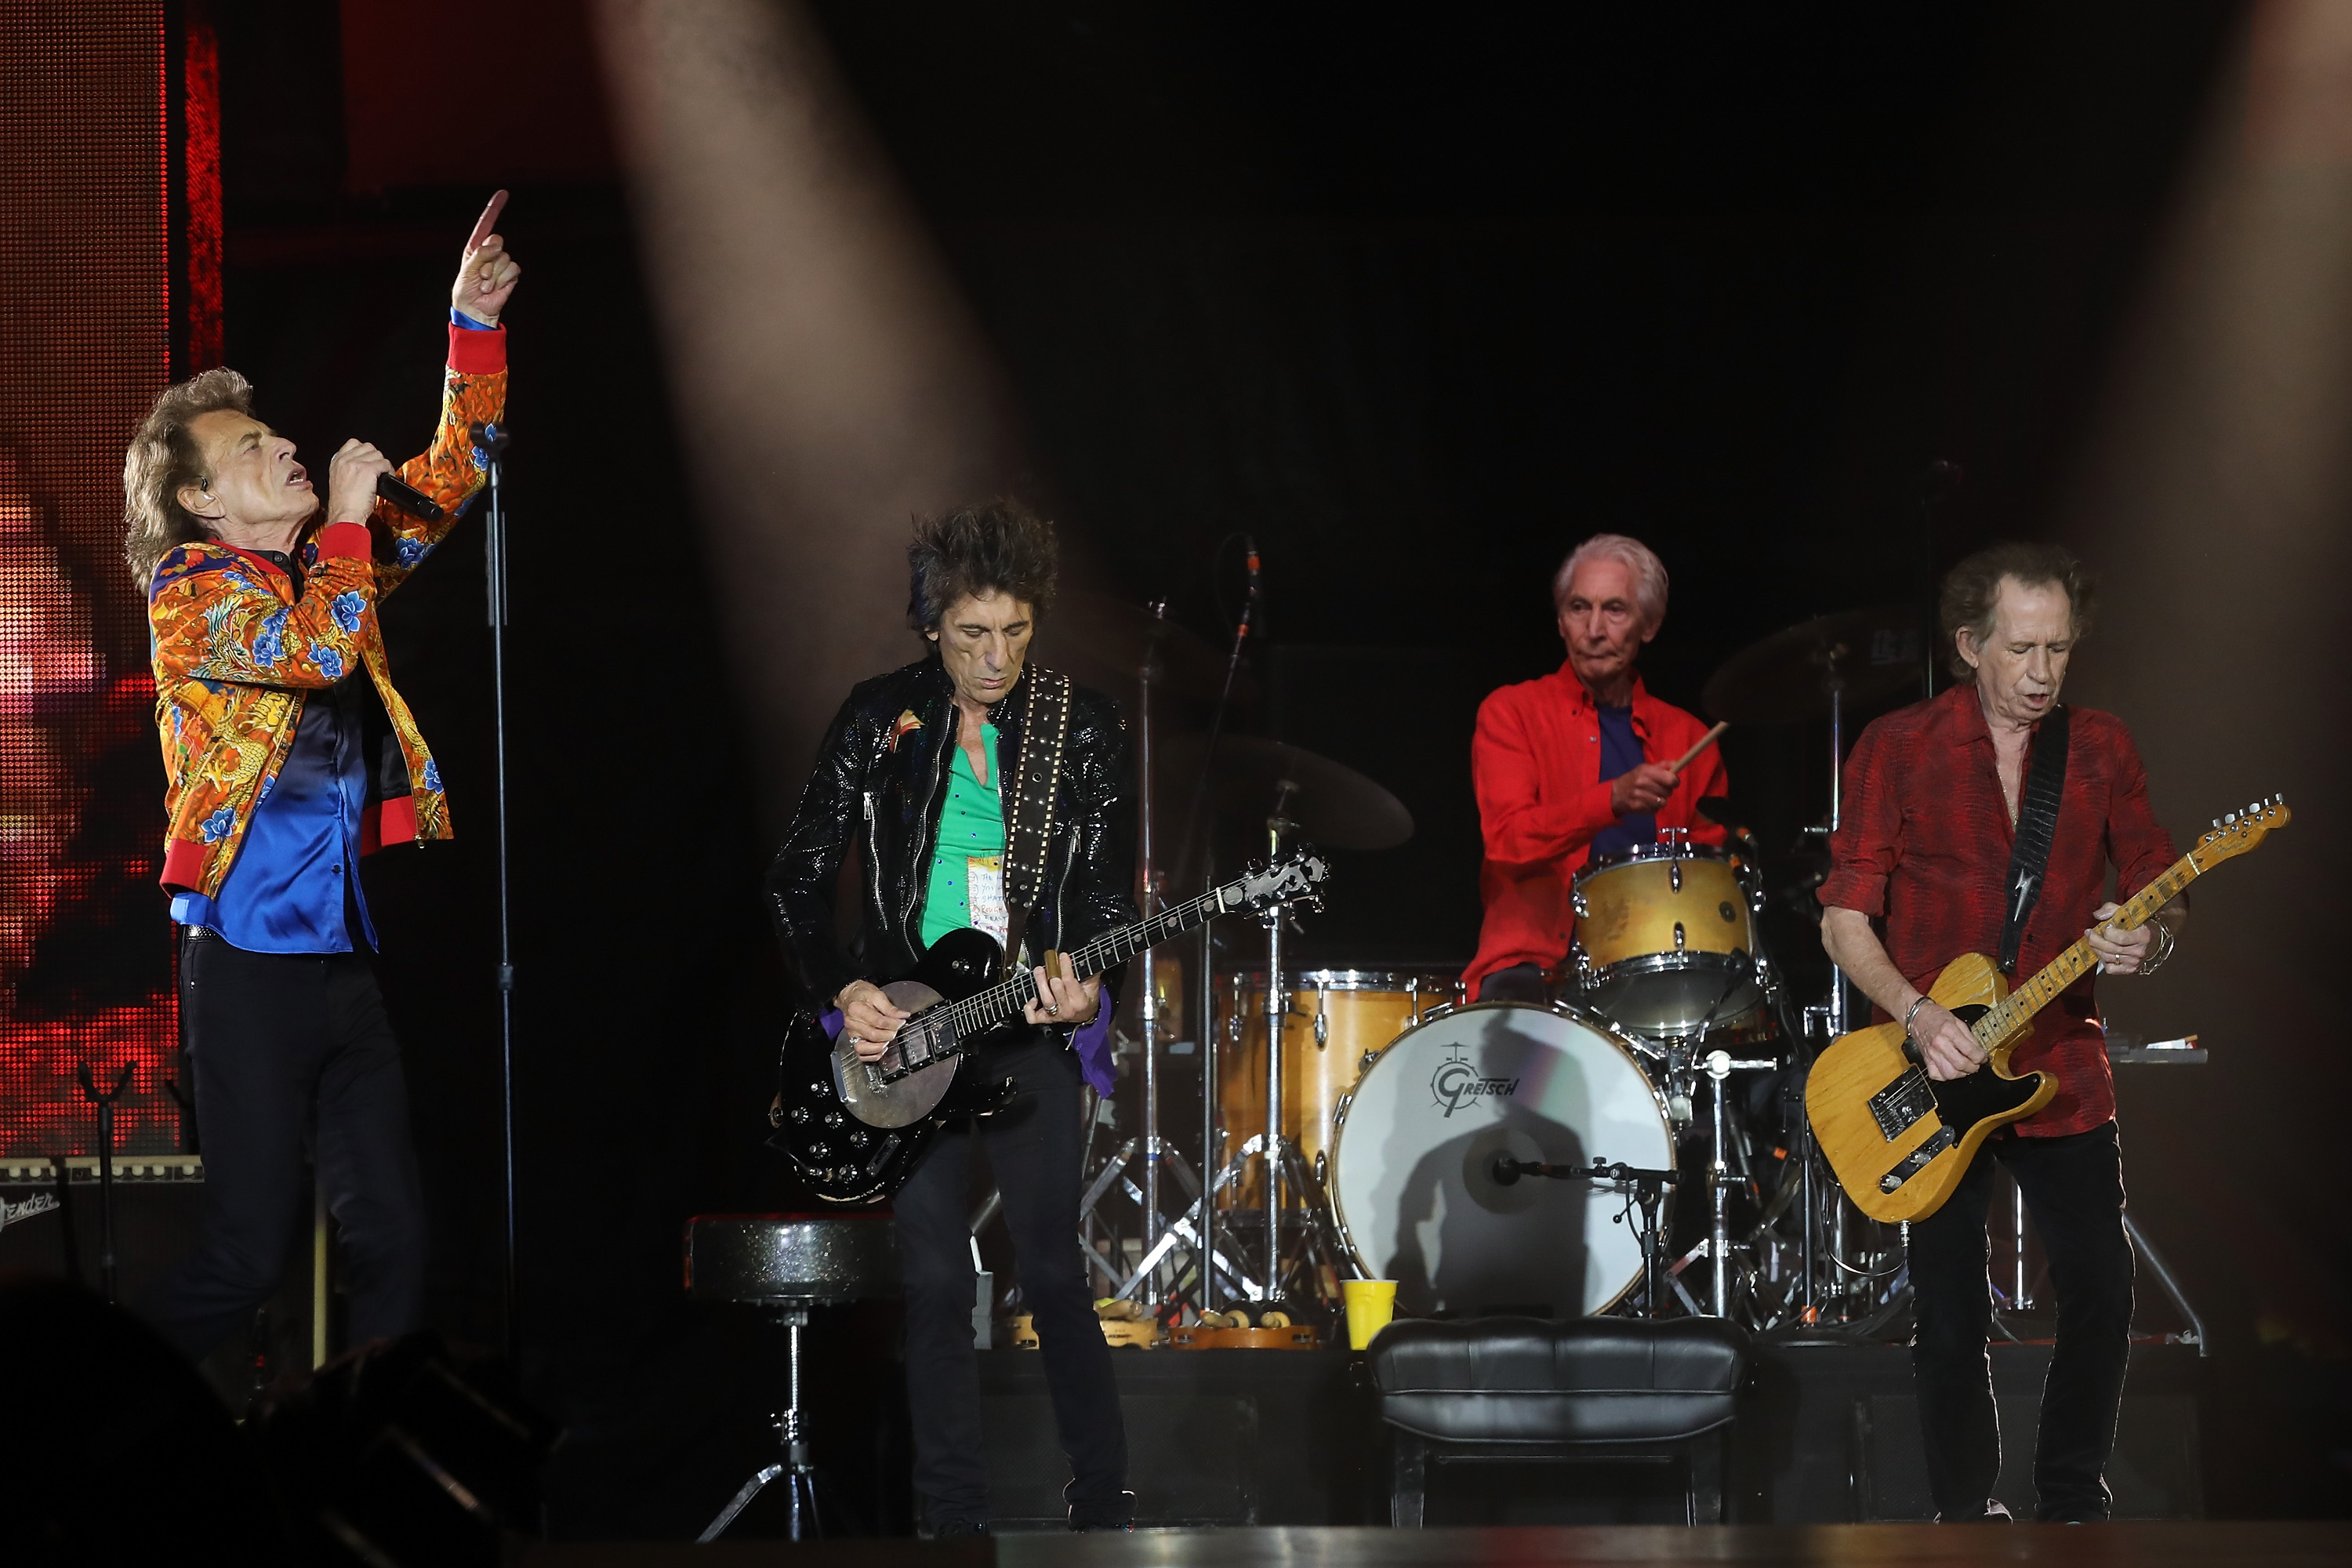 EAST RUTHERFORD, NEW JERSEY - AUGUST 05: (L-R) Mick Jagger, Ron Wood, Charlie Watts, and Keith Richards of The Rolling Stones perform at MetLife Stadium on August 05, 2019 in East Rutherford, New Jersey. (Photo by Taylor Hill/Getty Images)